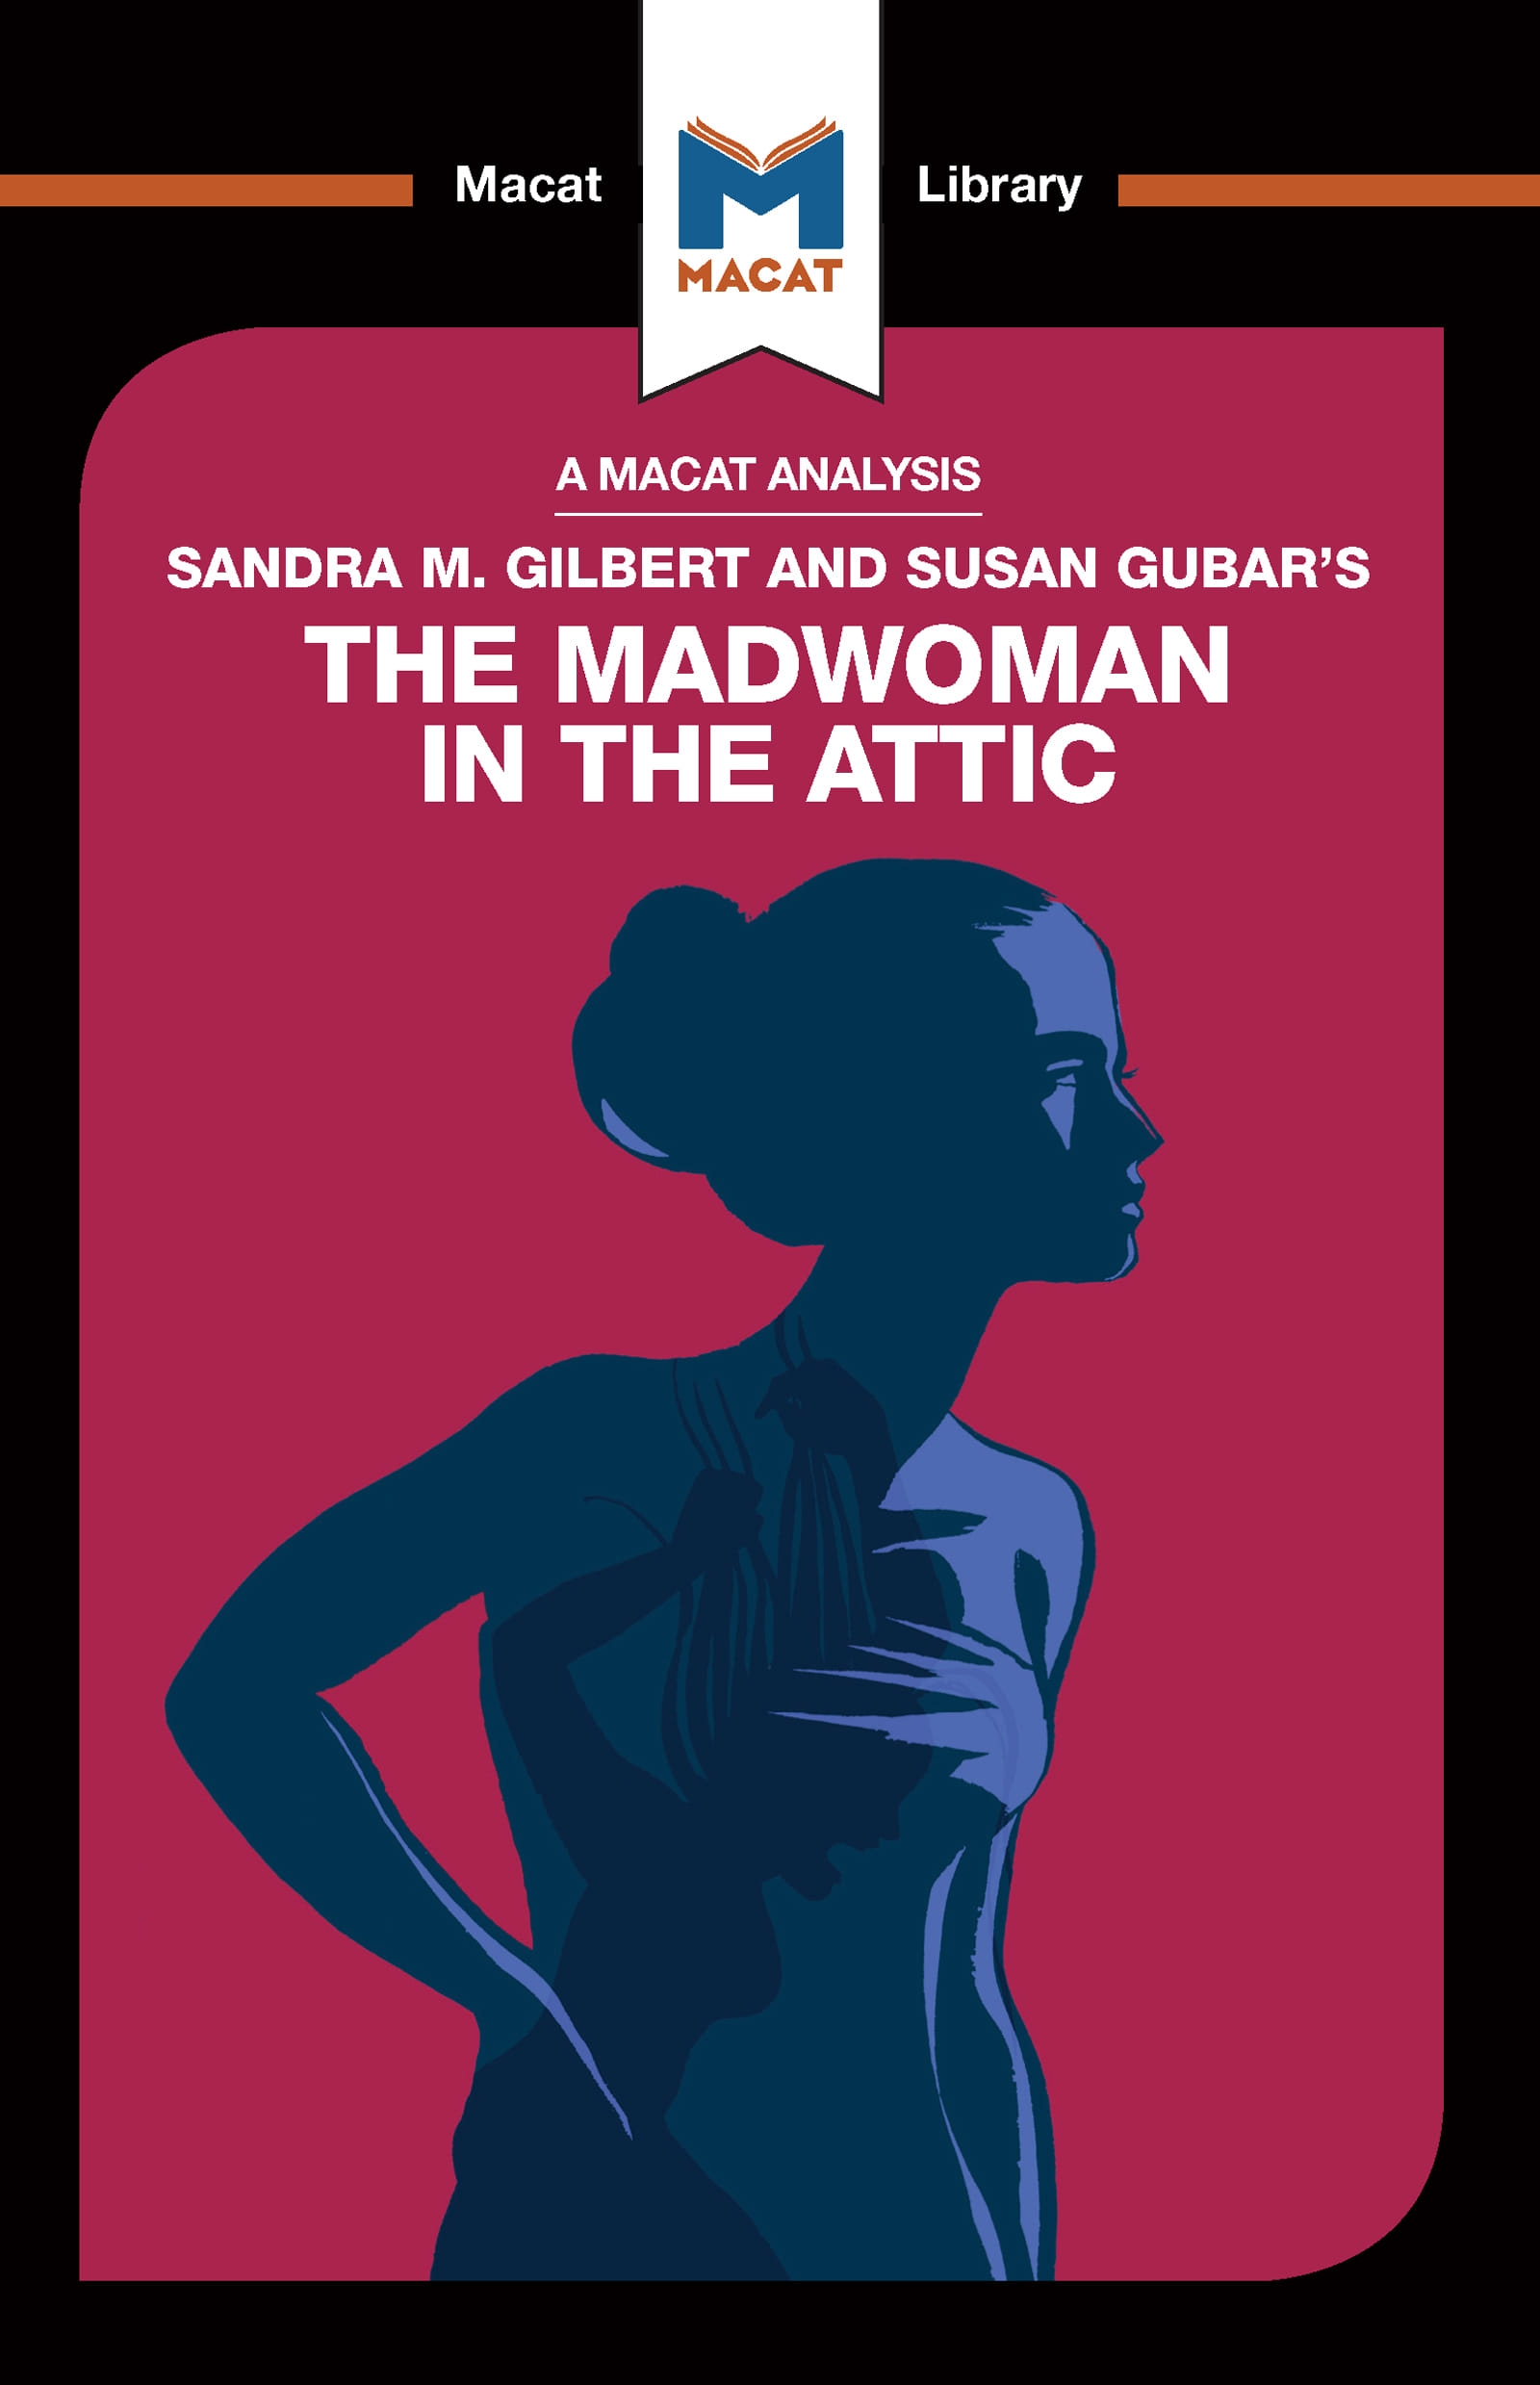 Sandra M. Gilbert and Susan Gubar’s the Madwoman in the Attic: The Woman Writer and the Nineteenth-Century Literary Imagination